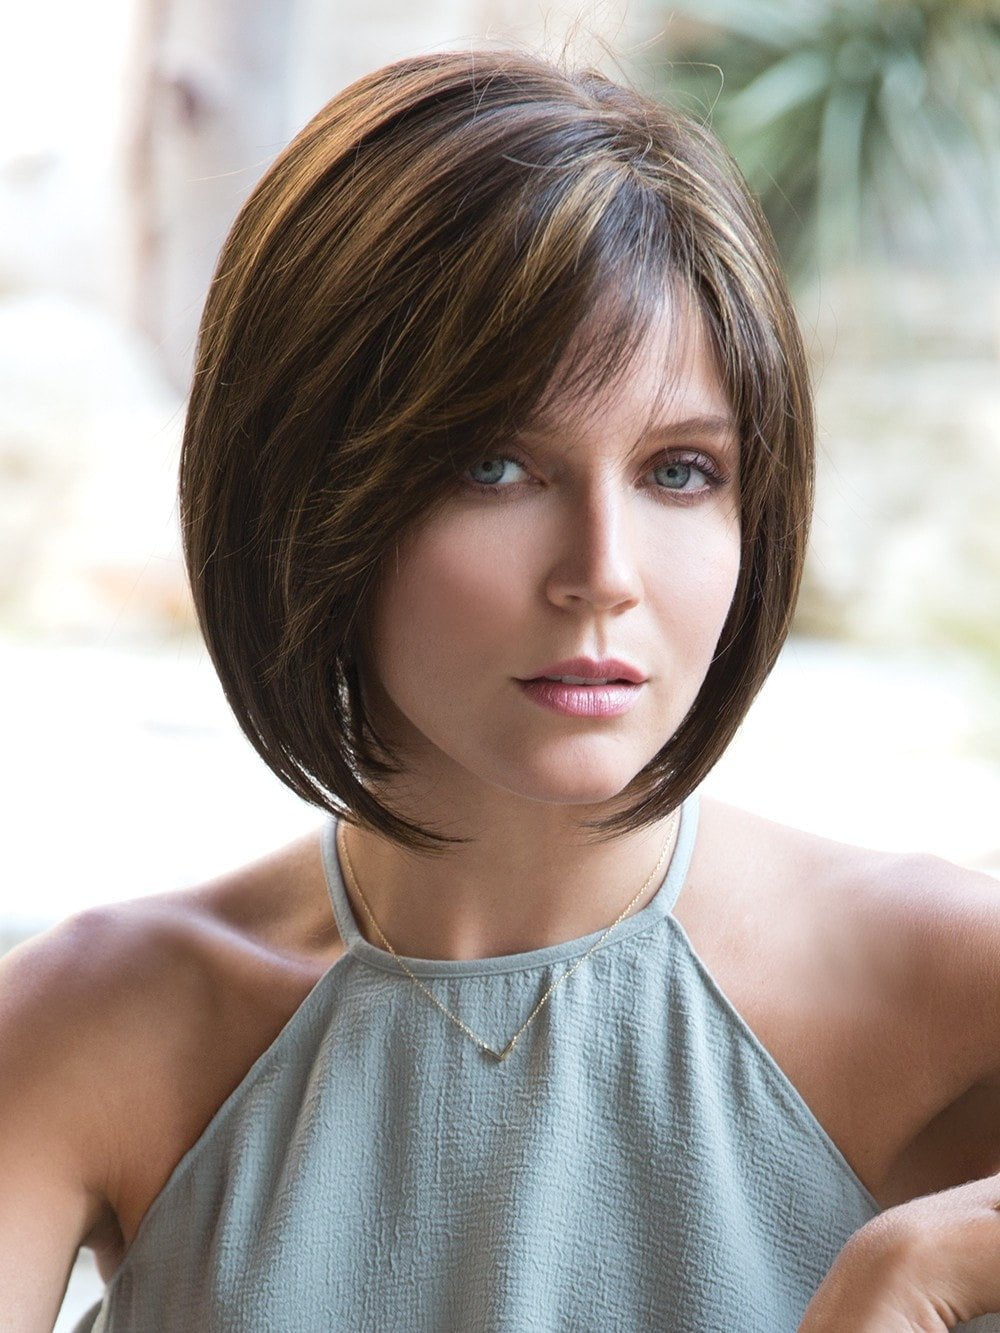 JOLIE by Noriko in Kahlua Blast | Medium Brown with Golden Blonde highlights on front and top PPC MAIN IMAGE